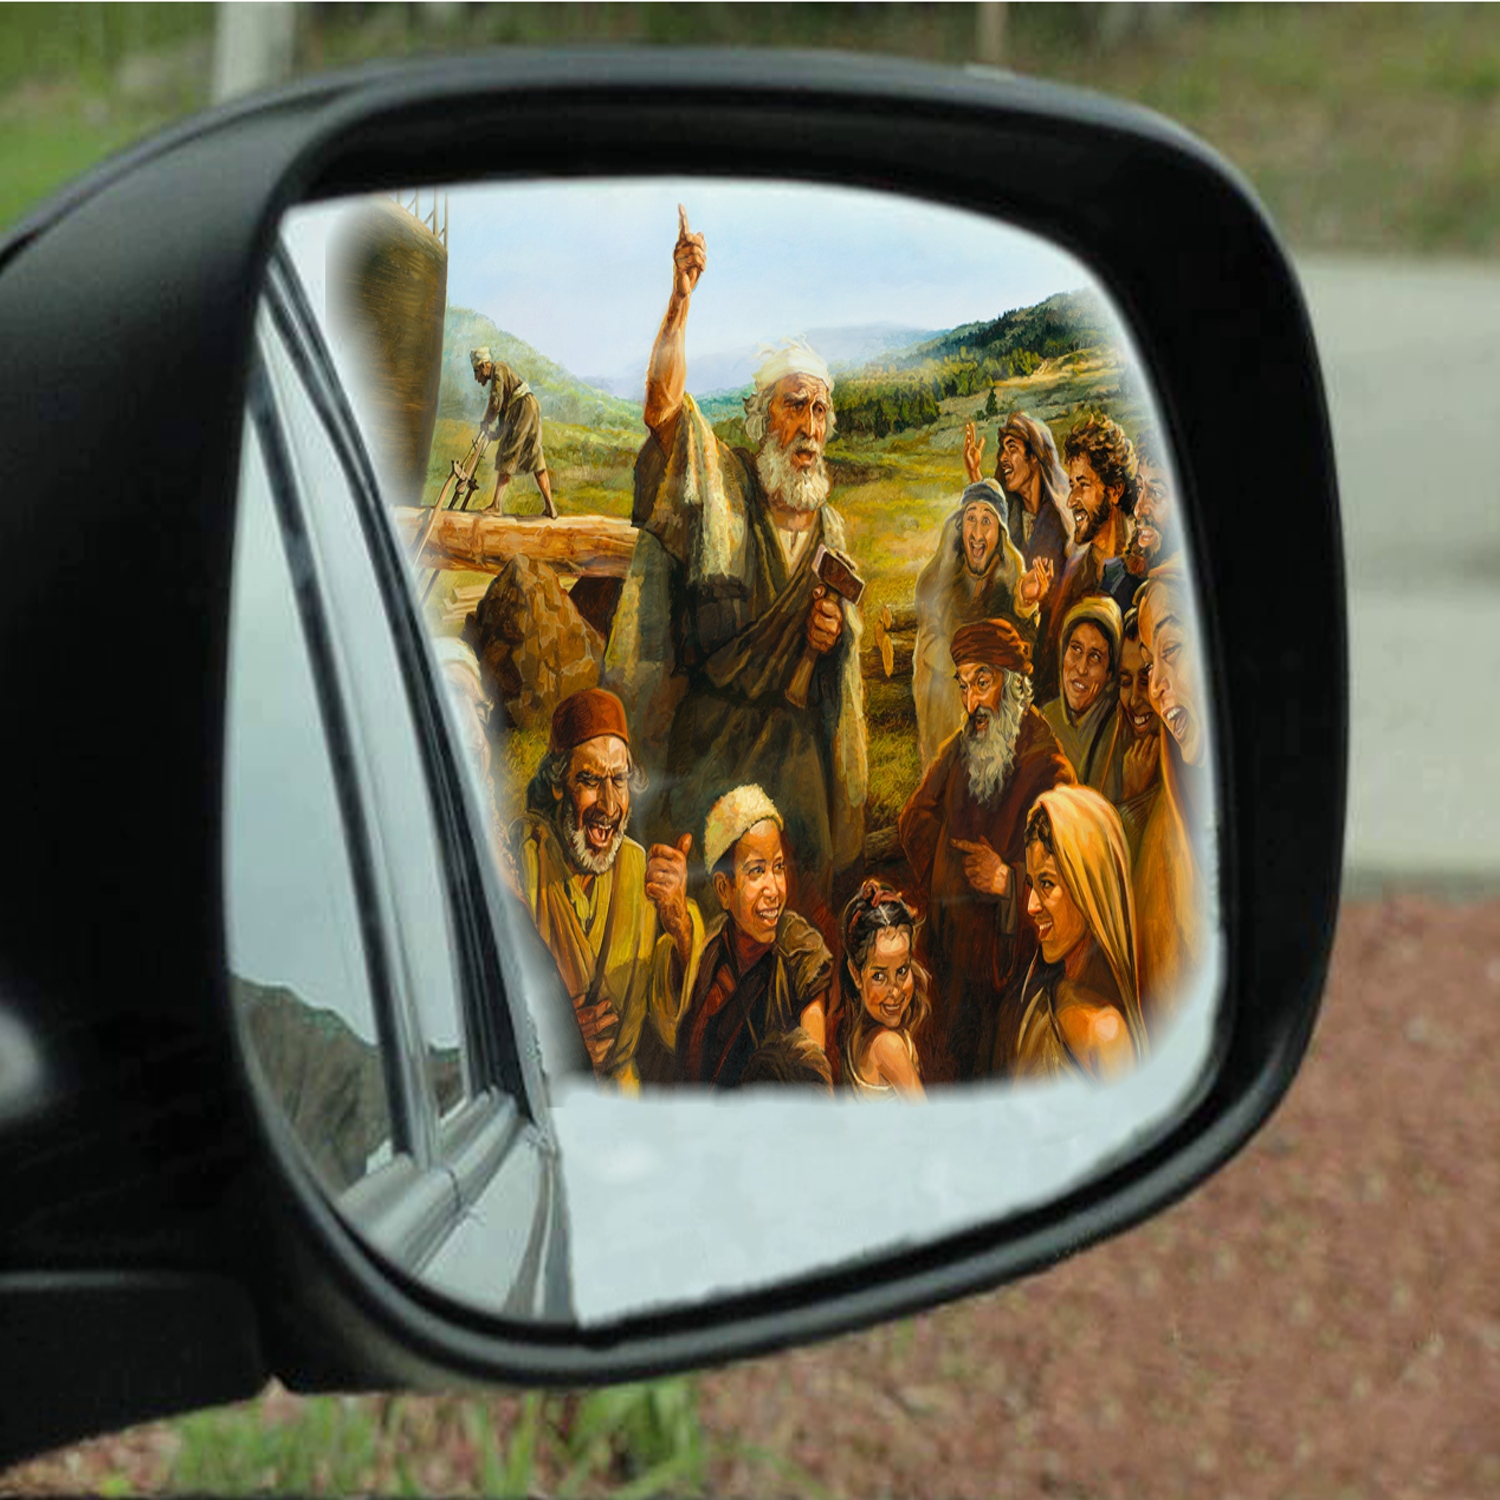 Objects In The Mirror Closer Than They Appear